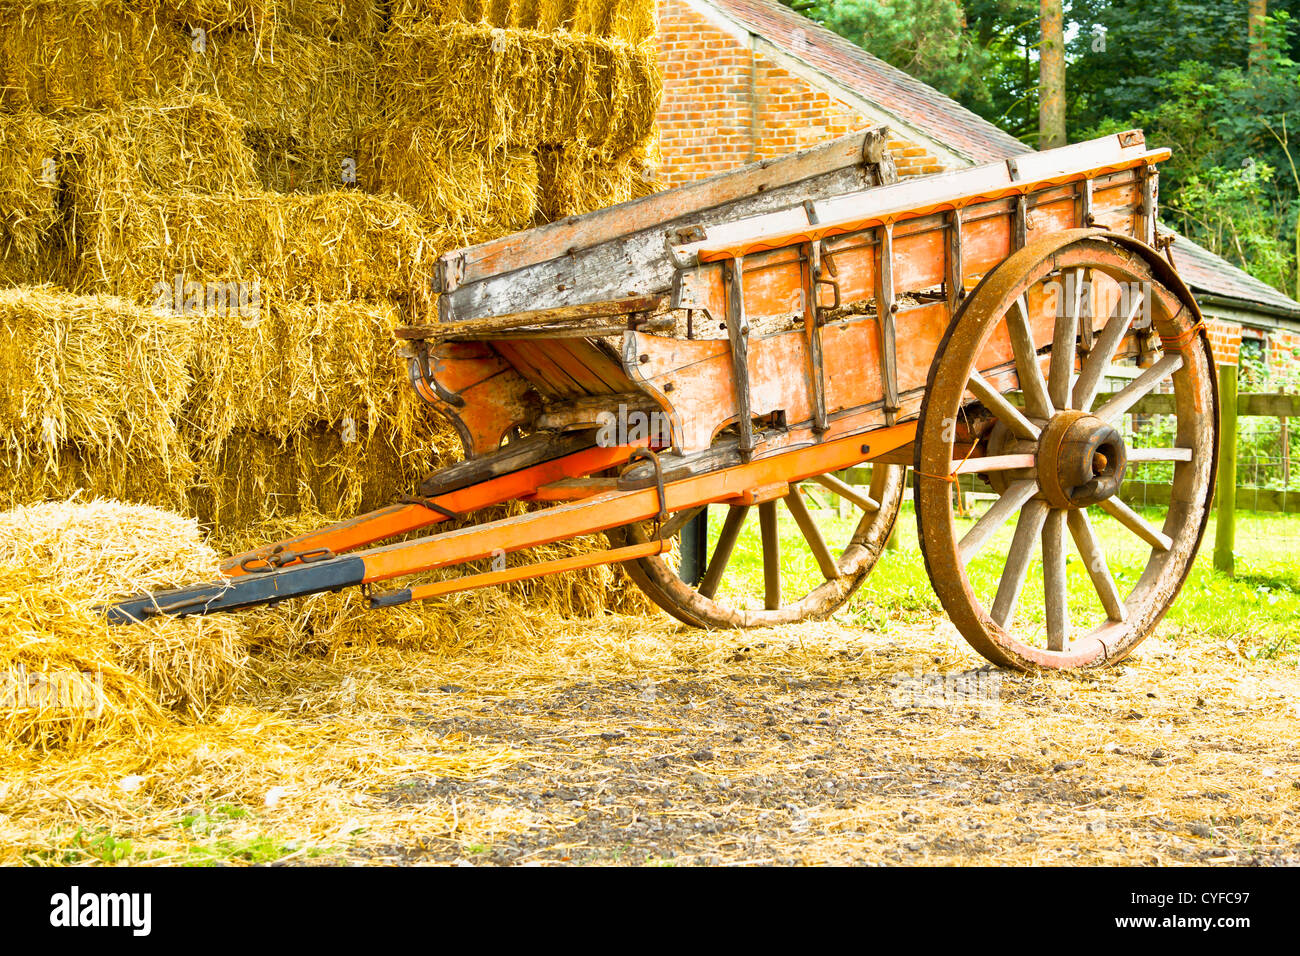 An old horse drawn cart Stock Photo